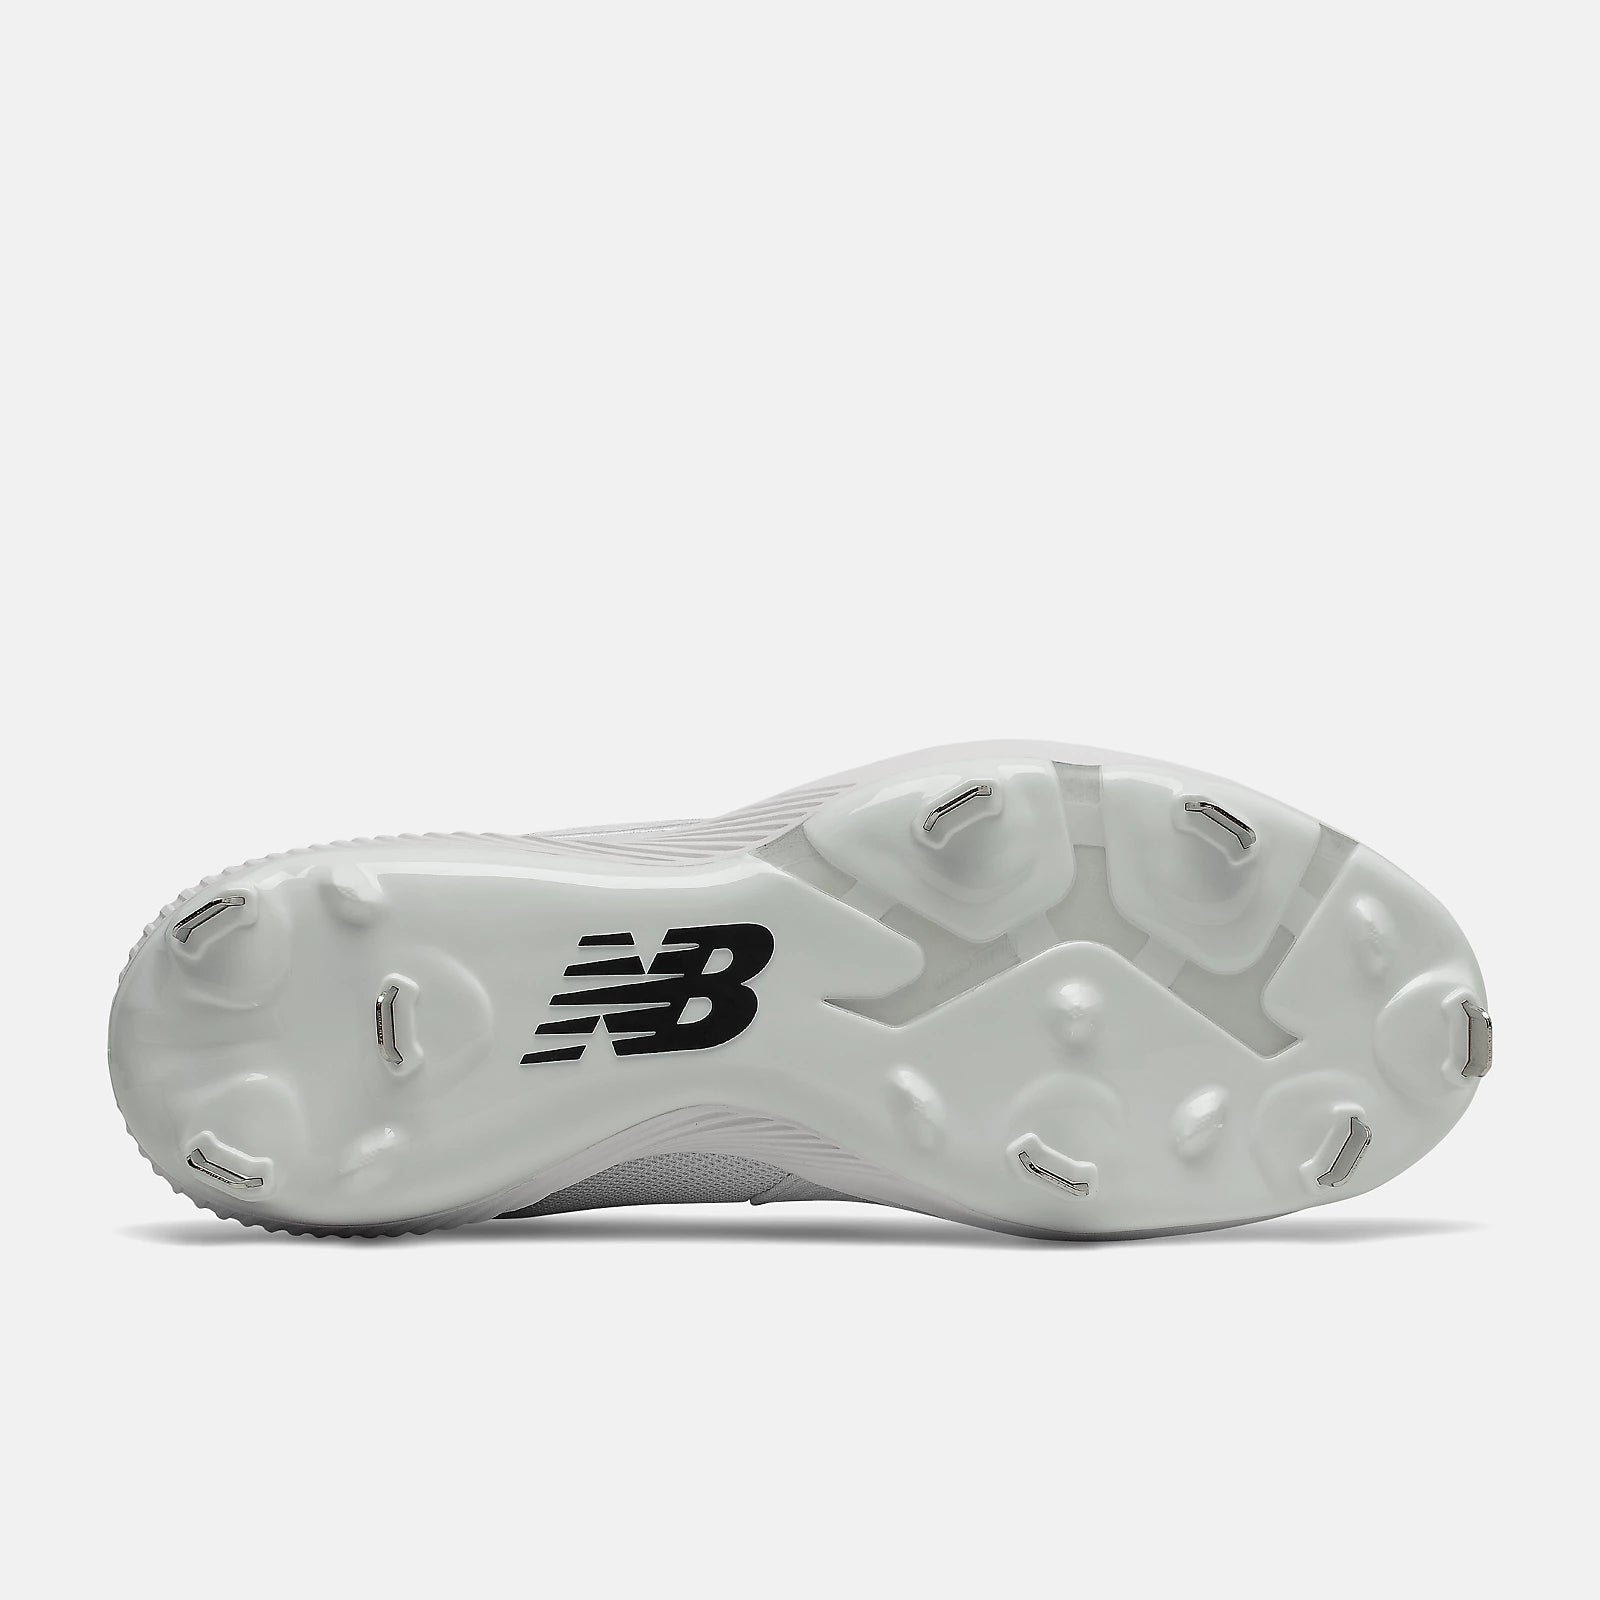 New Balance - White/Black FuelCell 4040v6 Metal Spikes (L4040TW6)